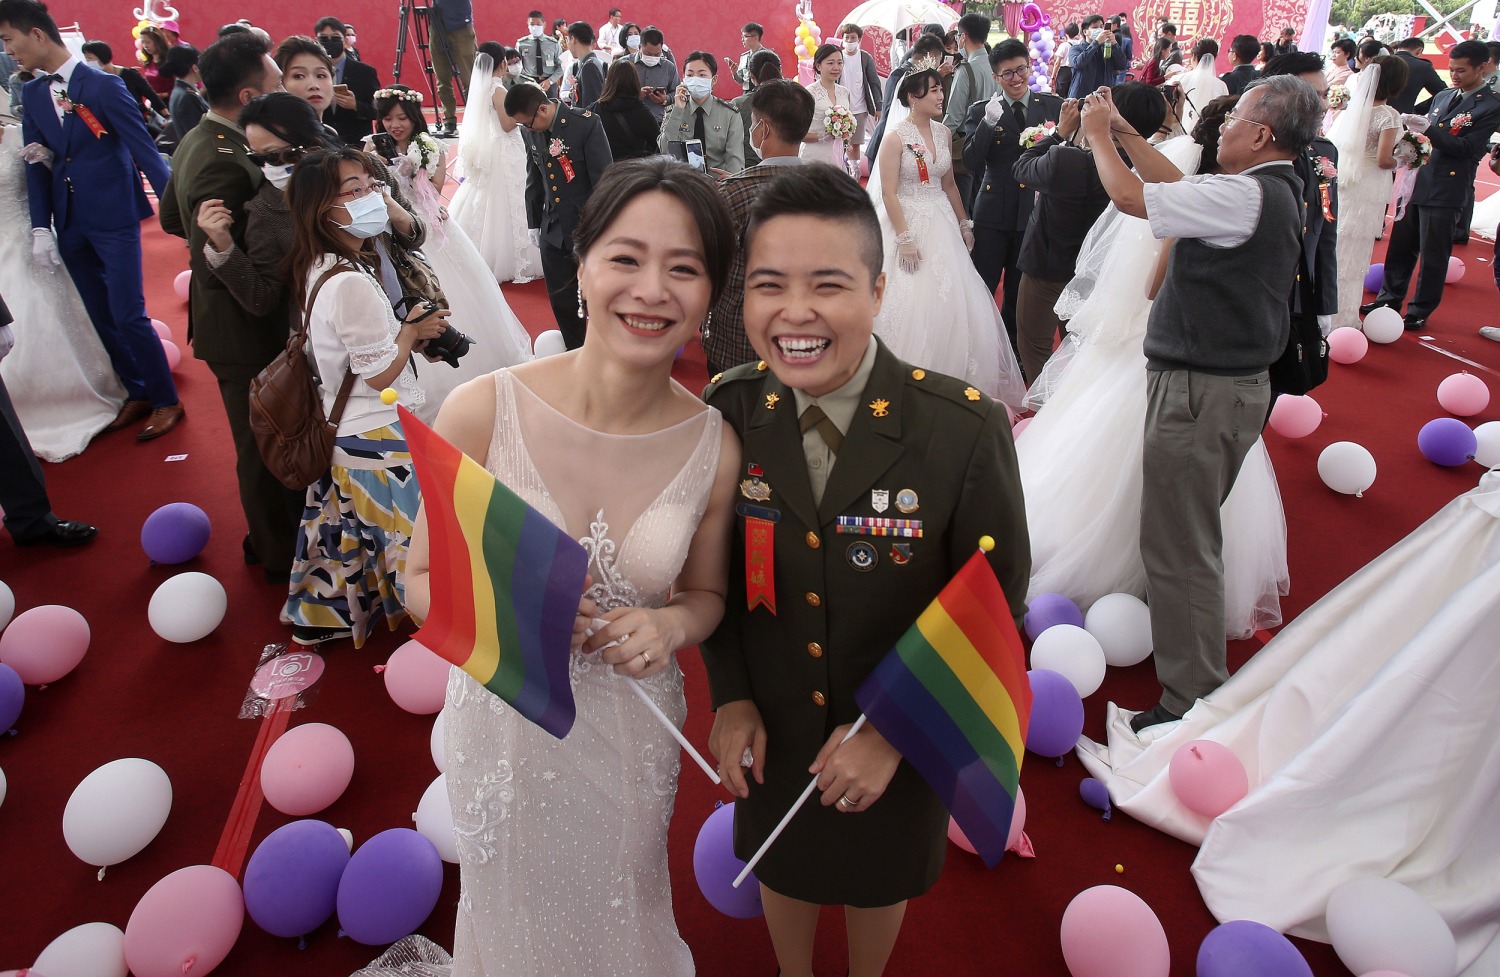 Two lesbian couples marry in mass wedding held by Taiwans military Xxx Pic Hd